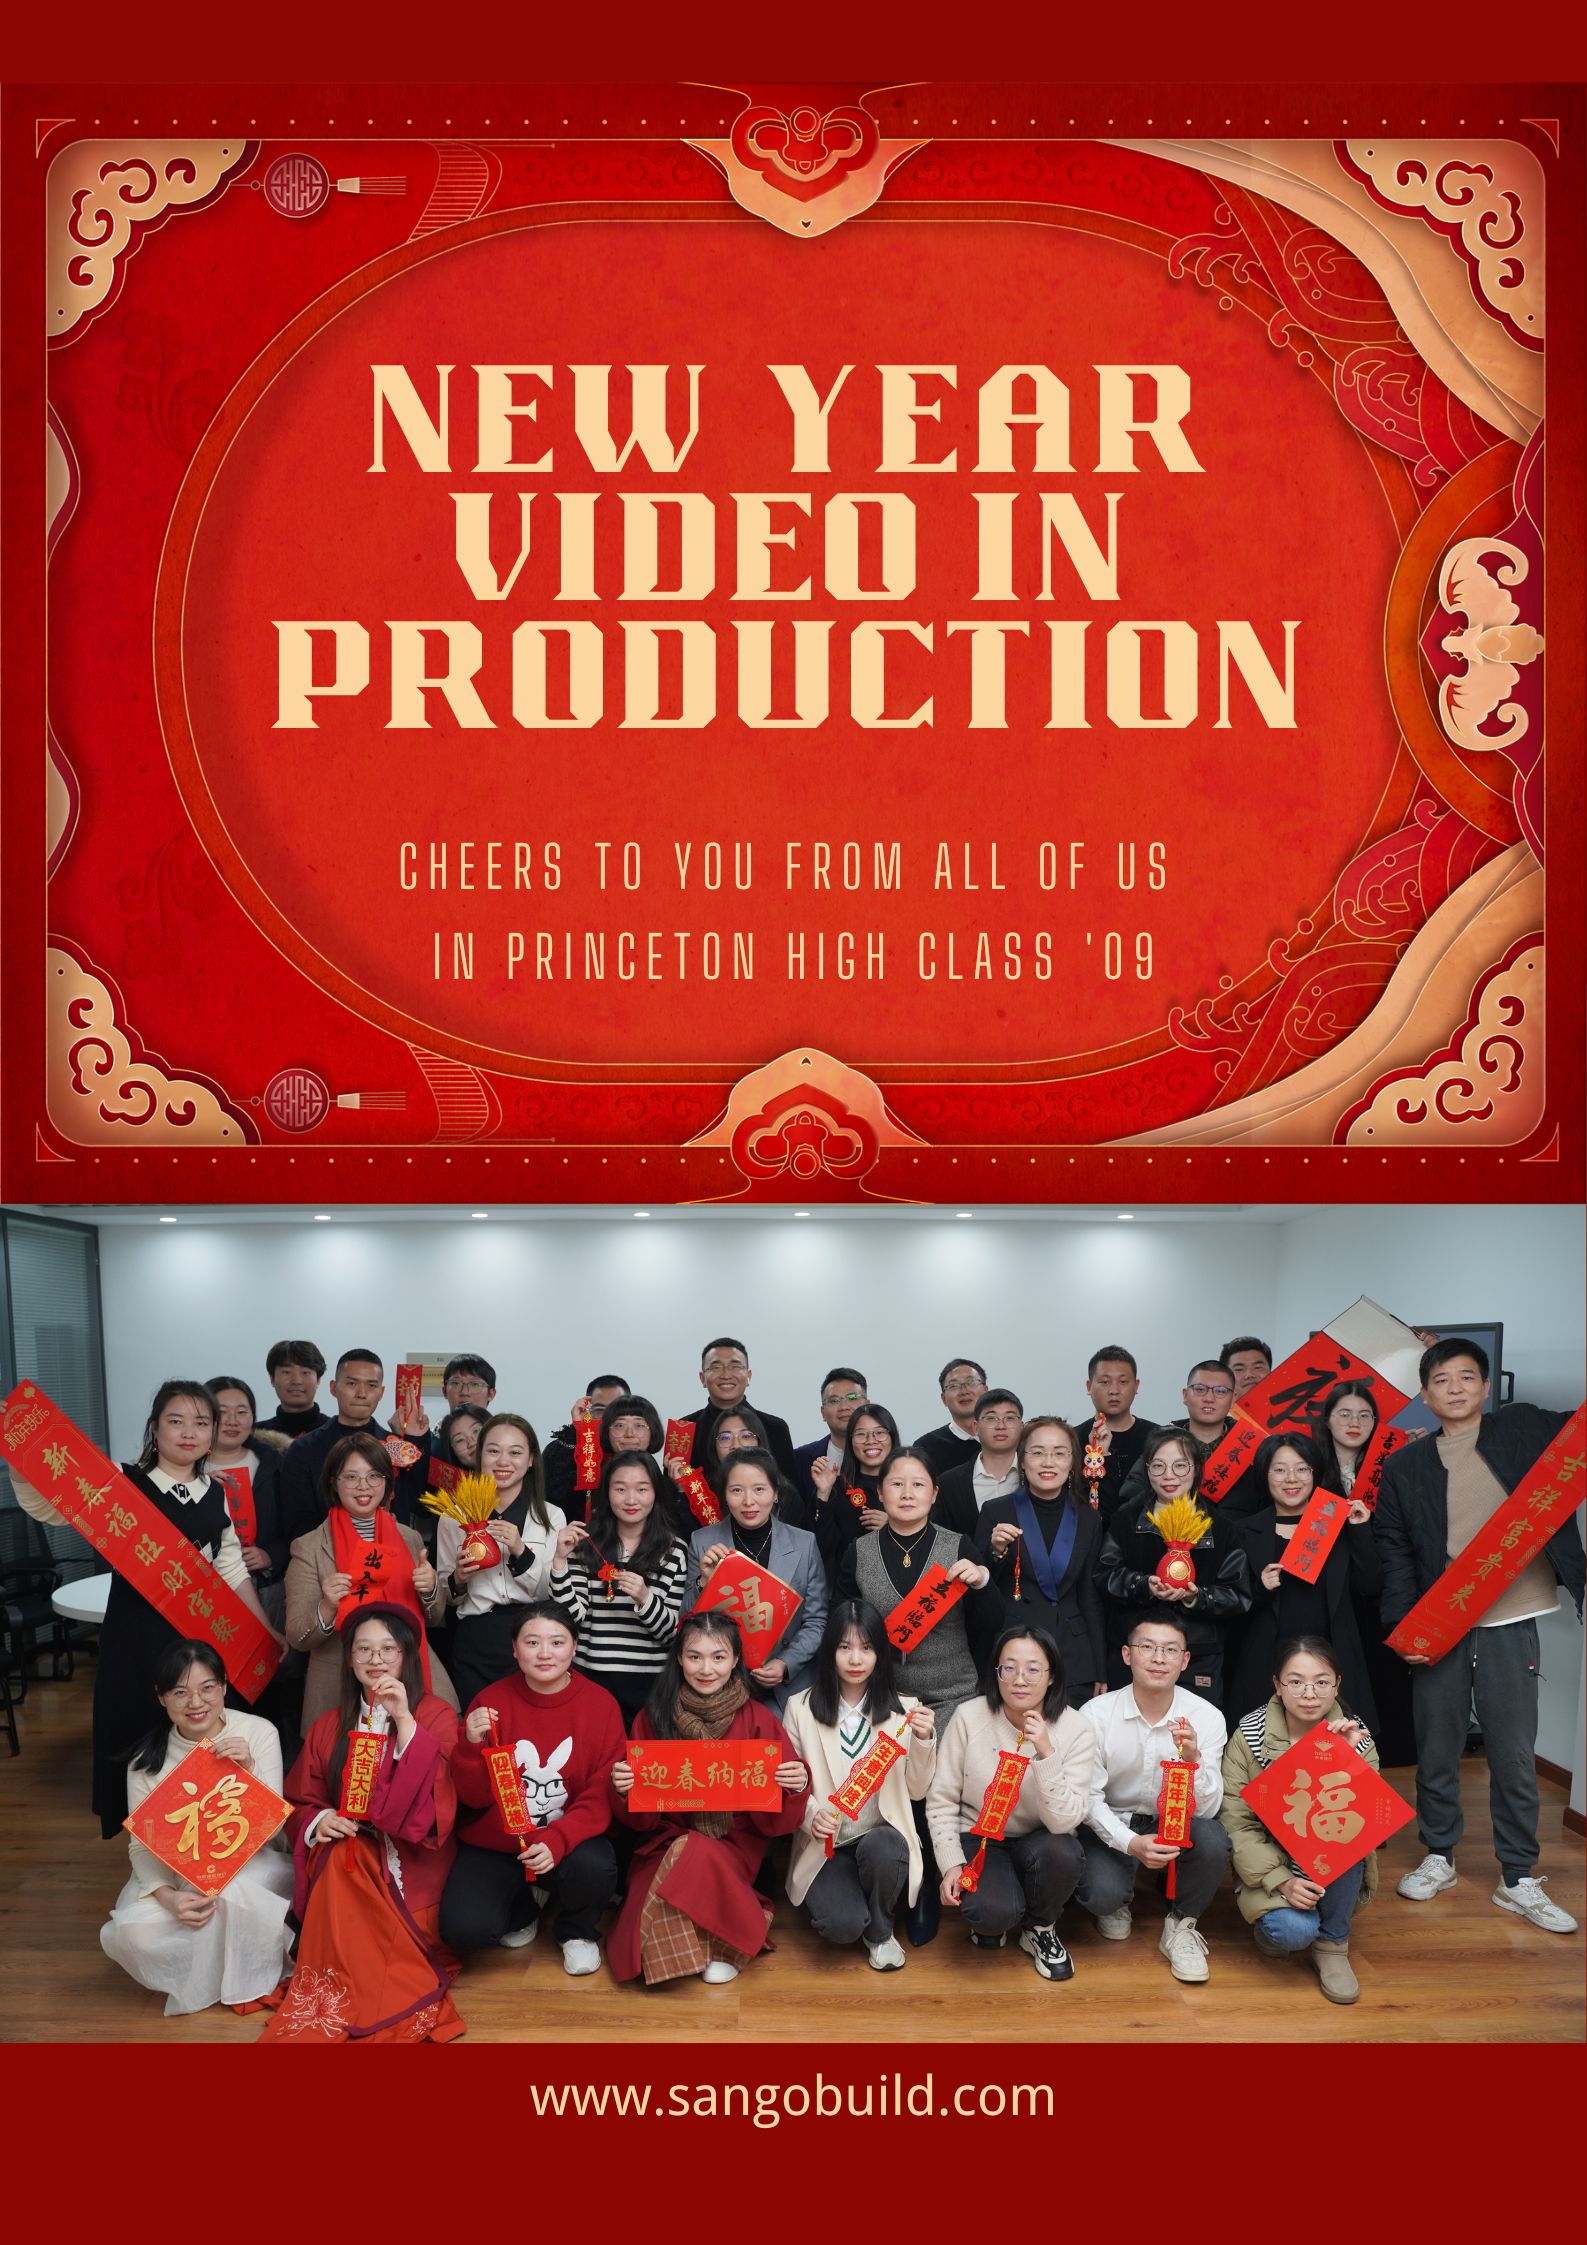 New Year's greetings from SANGOBUILD